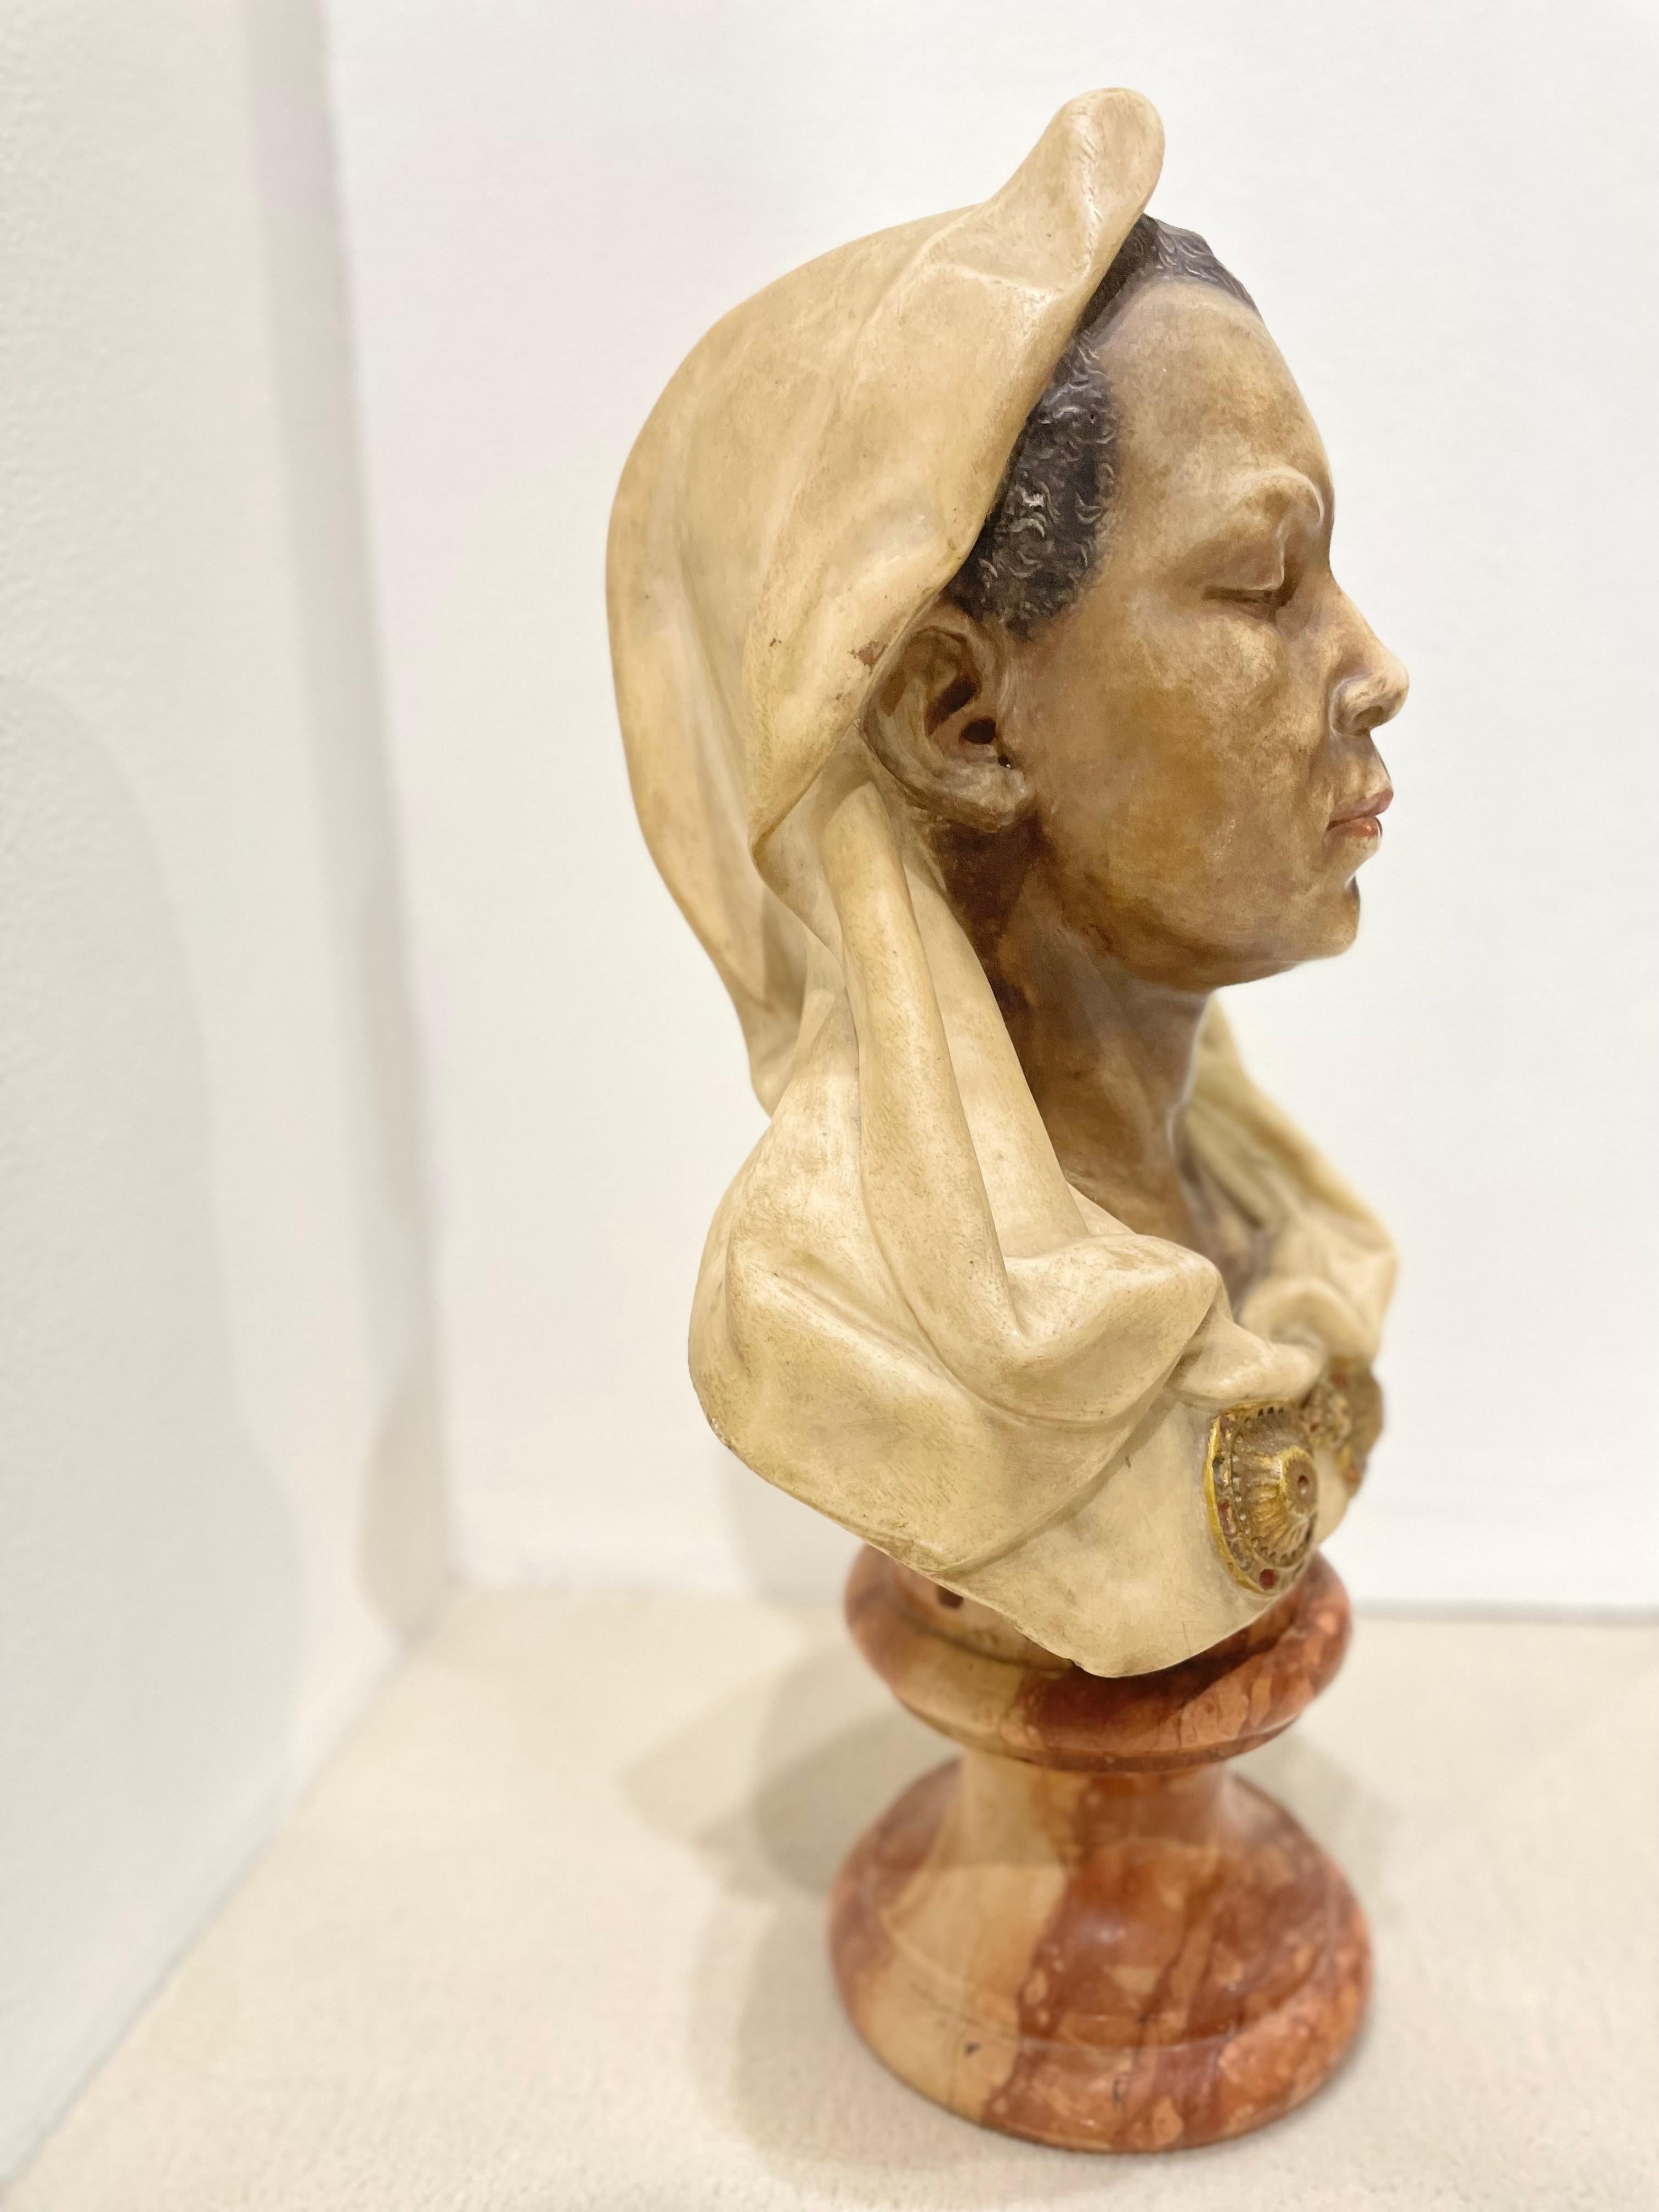 Bust sculpted in Carrara marble. Nubian polychrome is extremely well-executed giving a realistic effect. A white veil is attached by a golden fibula. Red marble base. Signed on the back Marchetti.